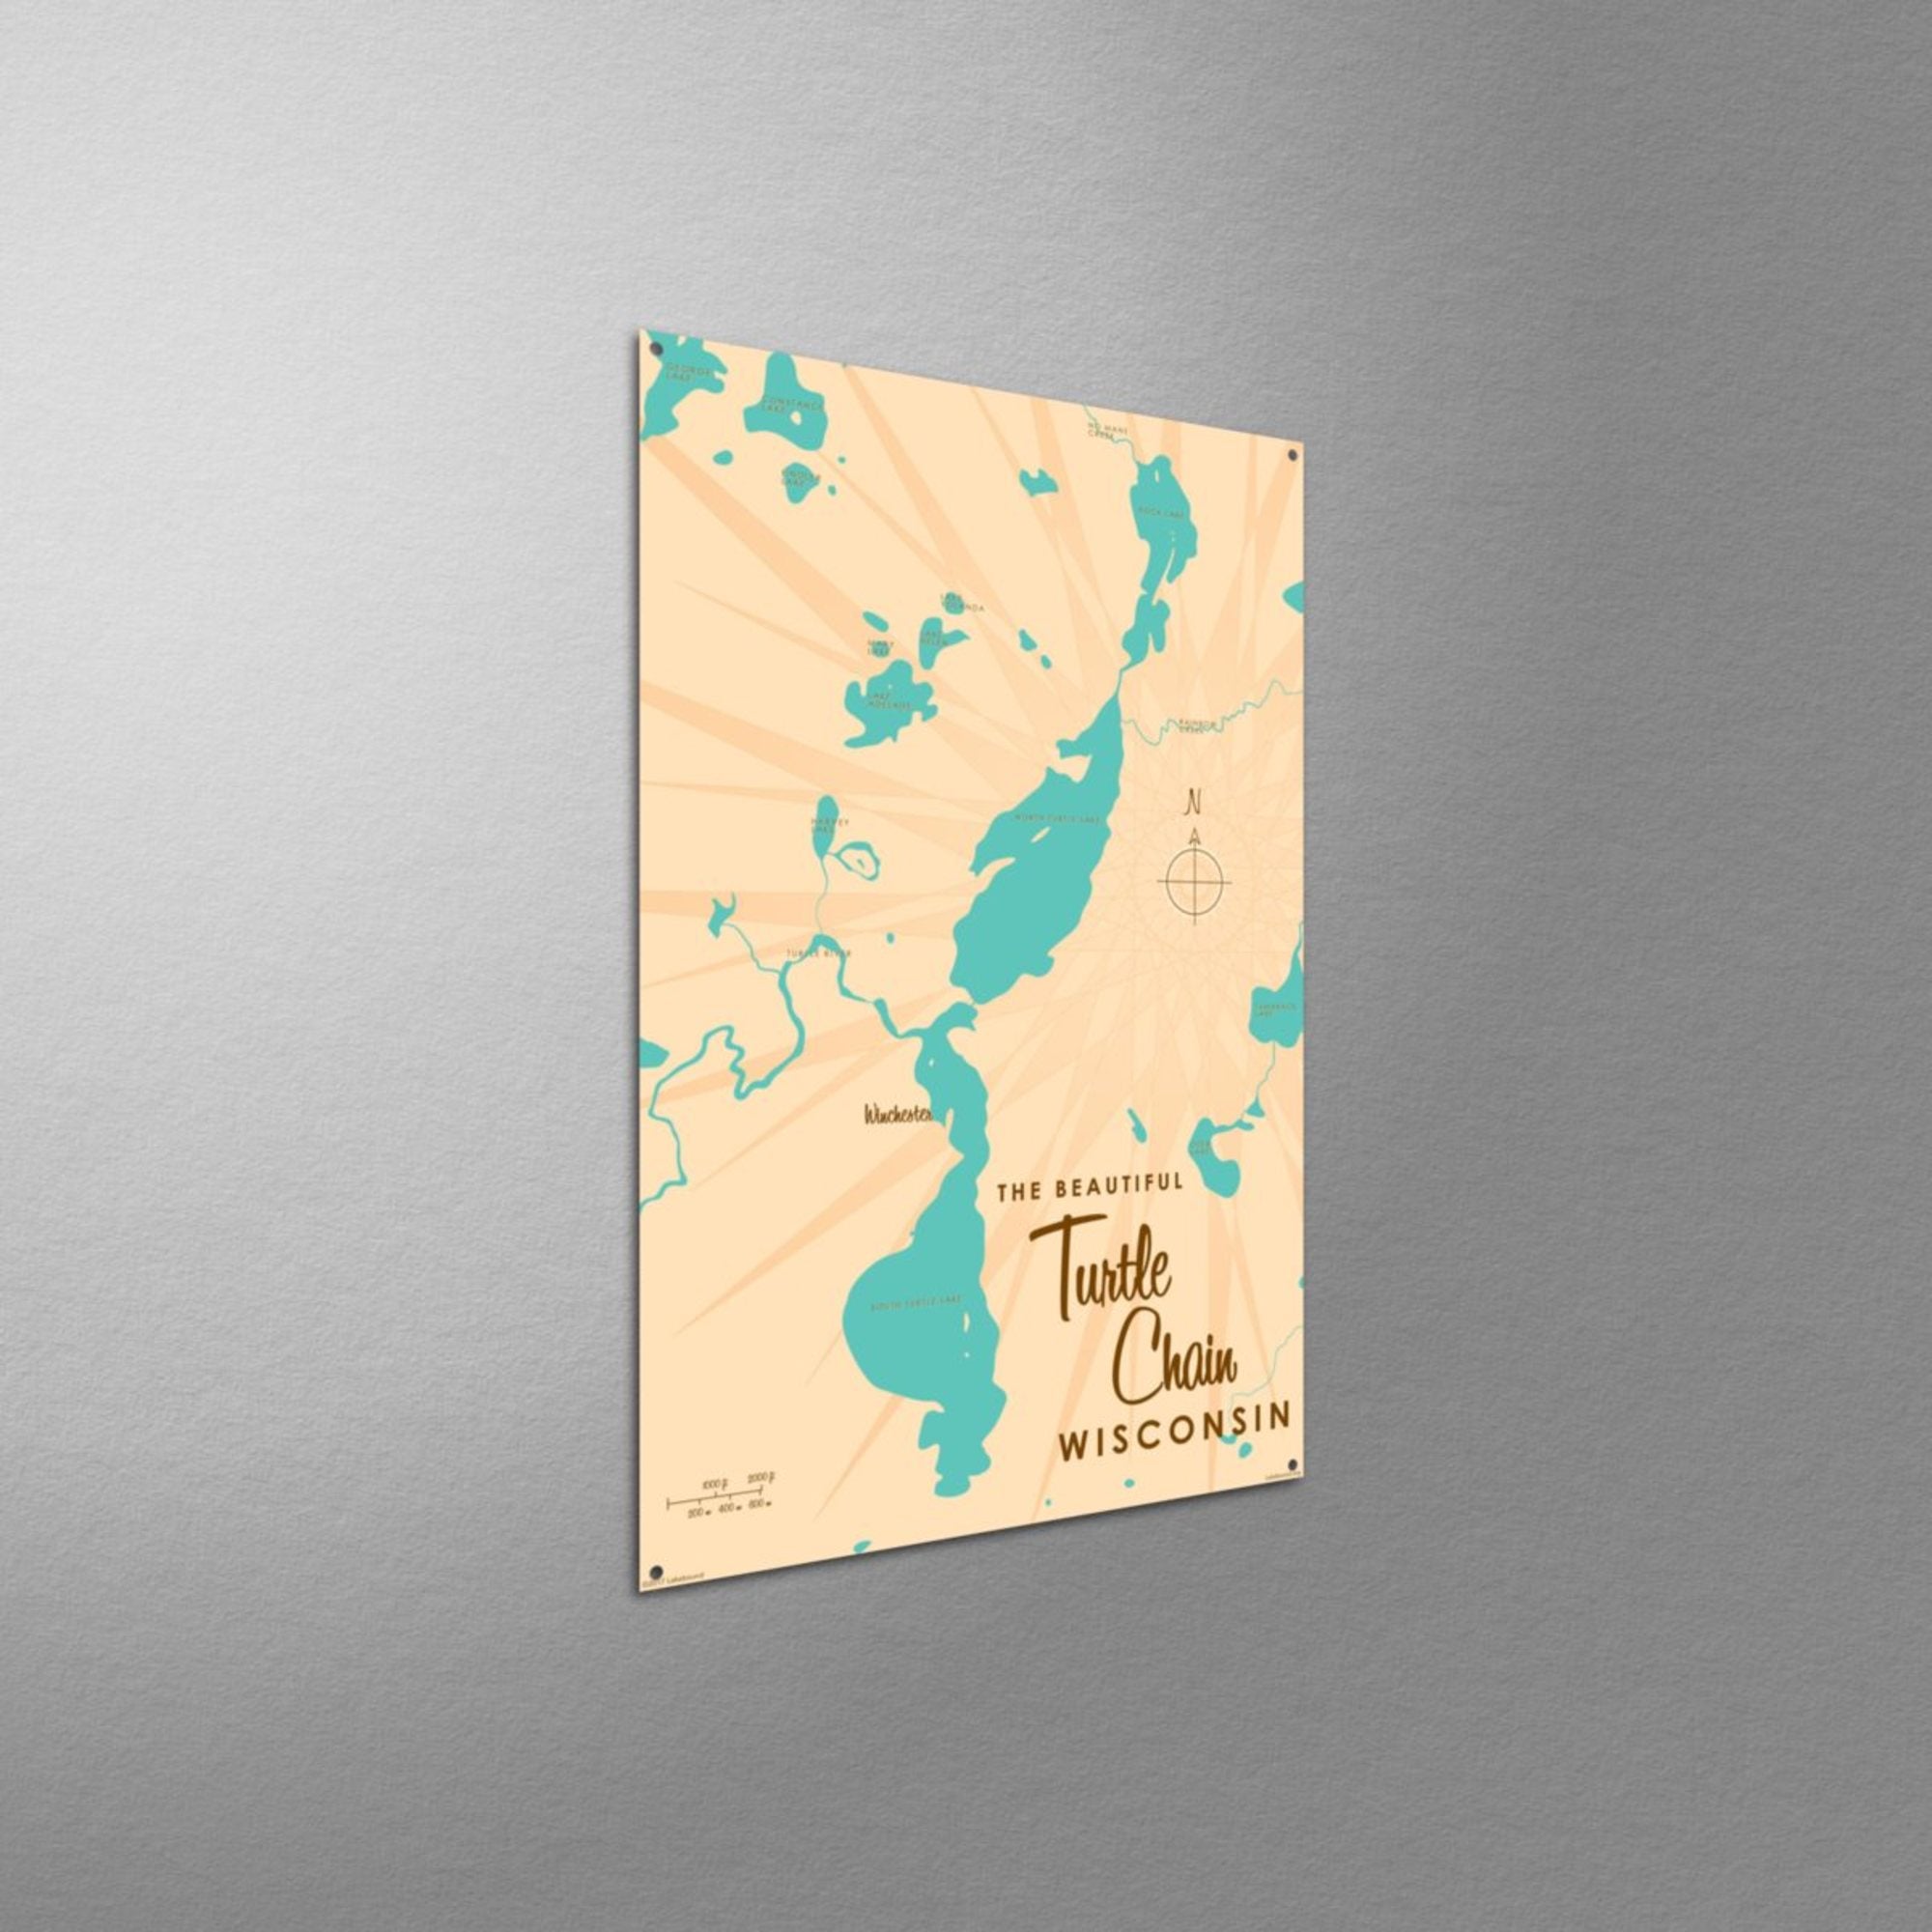 Turtle Chain Wisconsin, Metal Sign Map Art